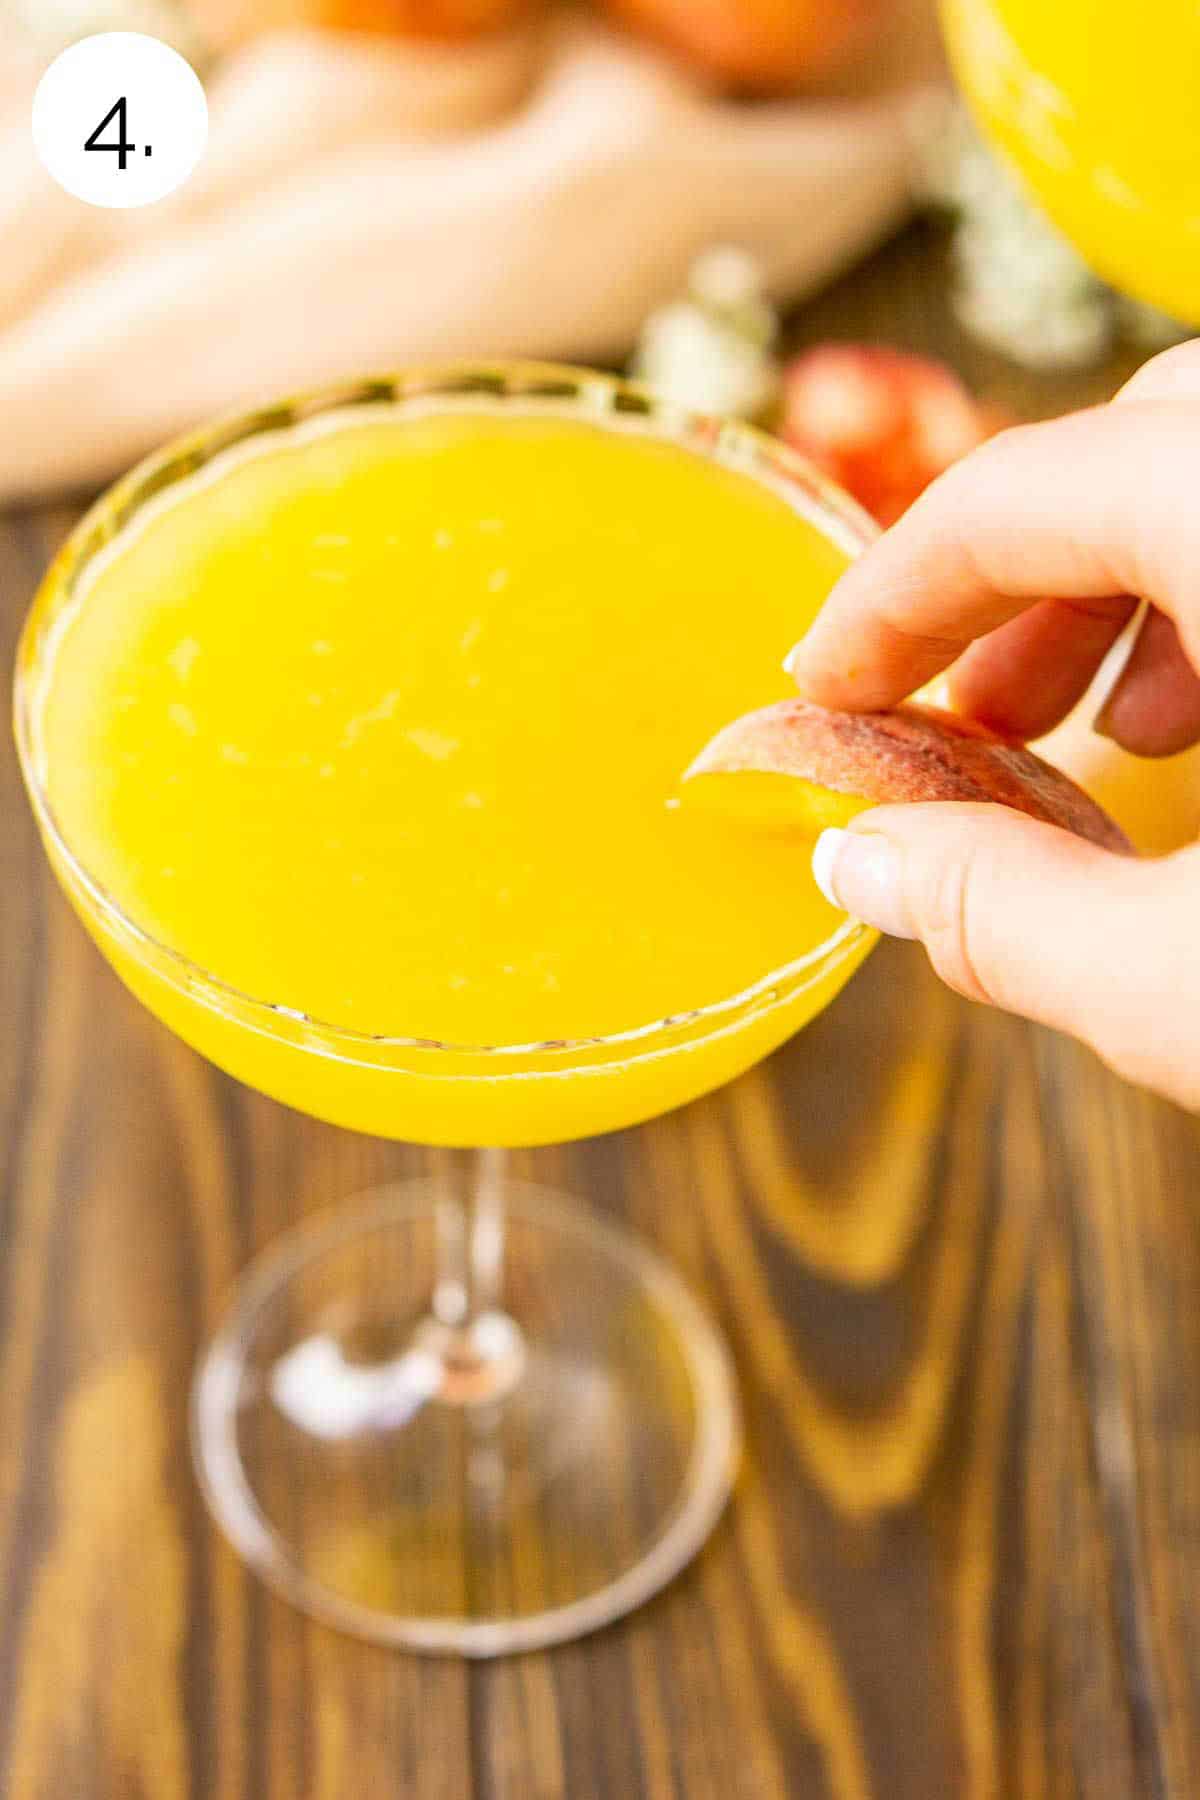 A hand putting the fresh peach slice on the glass to garnish.